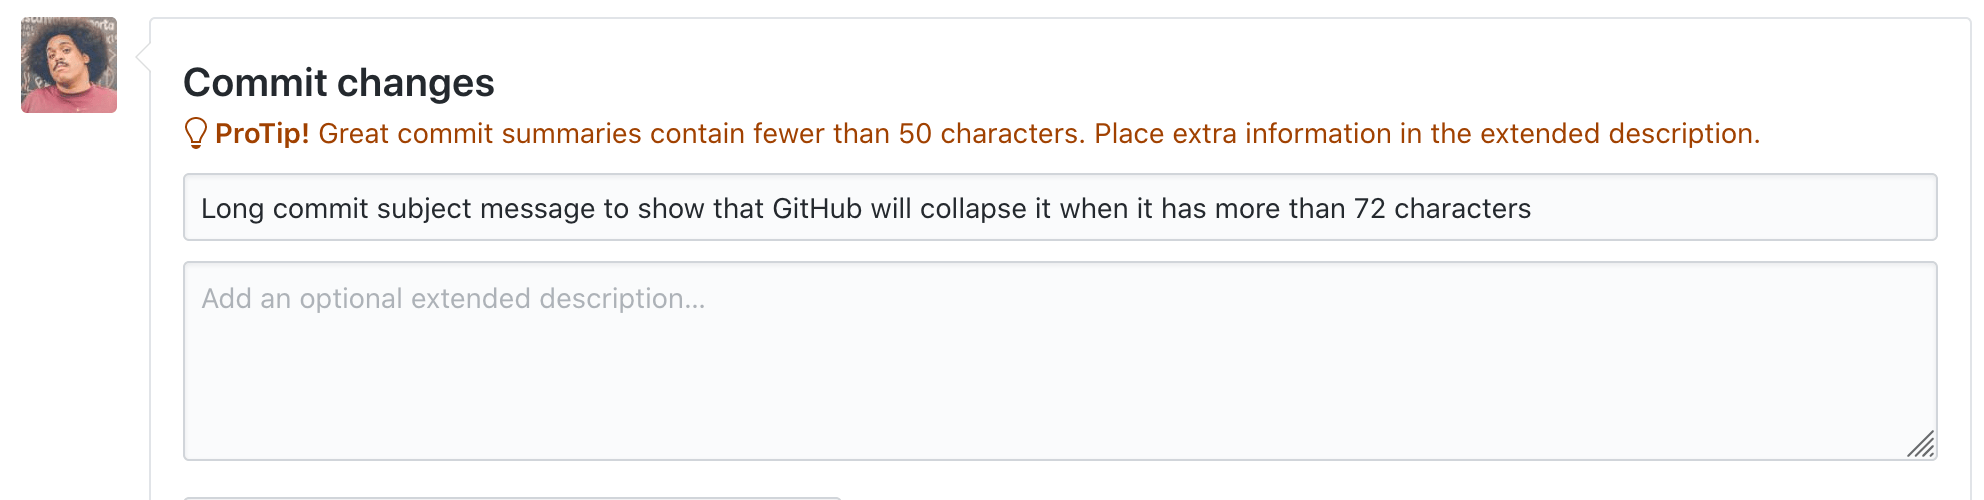 Image of a text input with the title "Commit message" and the message "Long commit subject message to show that GitHub will collapse it when it has more than 72 characters" and a warning text with the message "Pro tip! Great commit summaries contain fewer than 50 characters. Place extra information in the extended description"